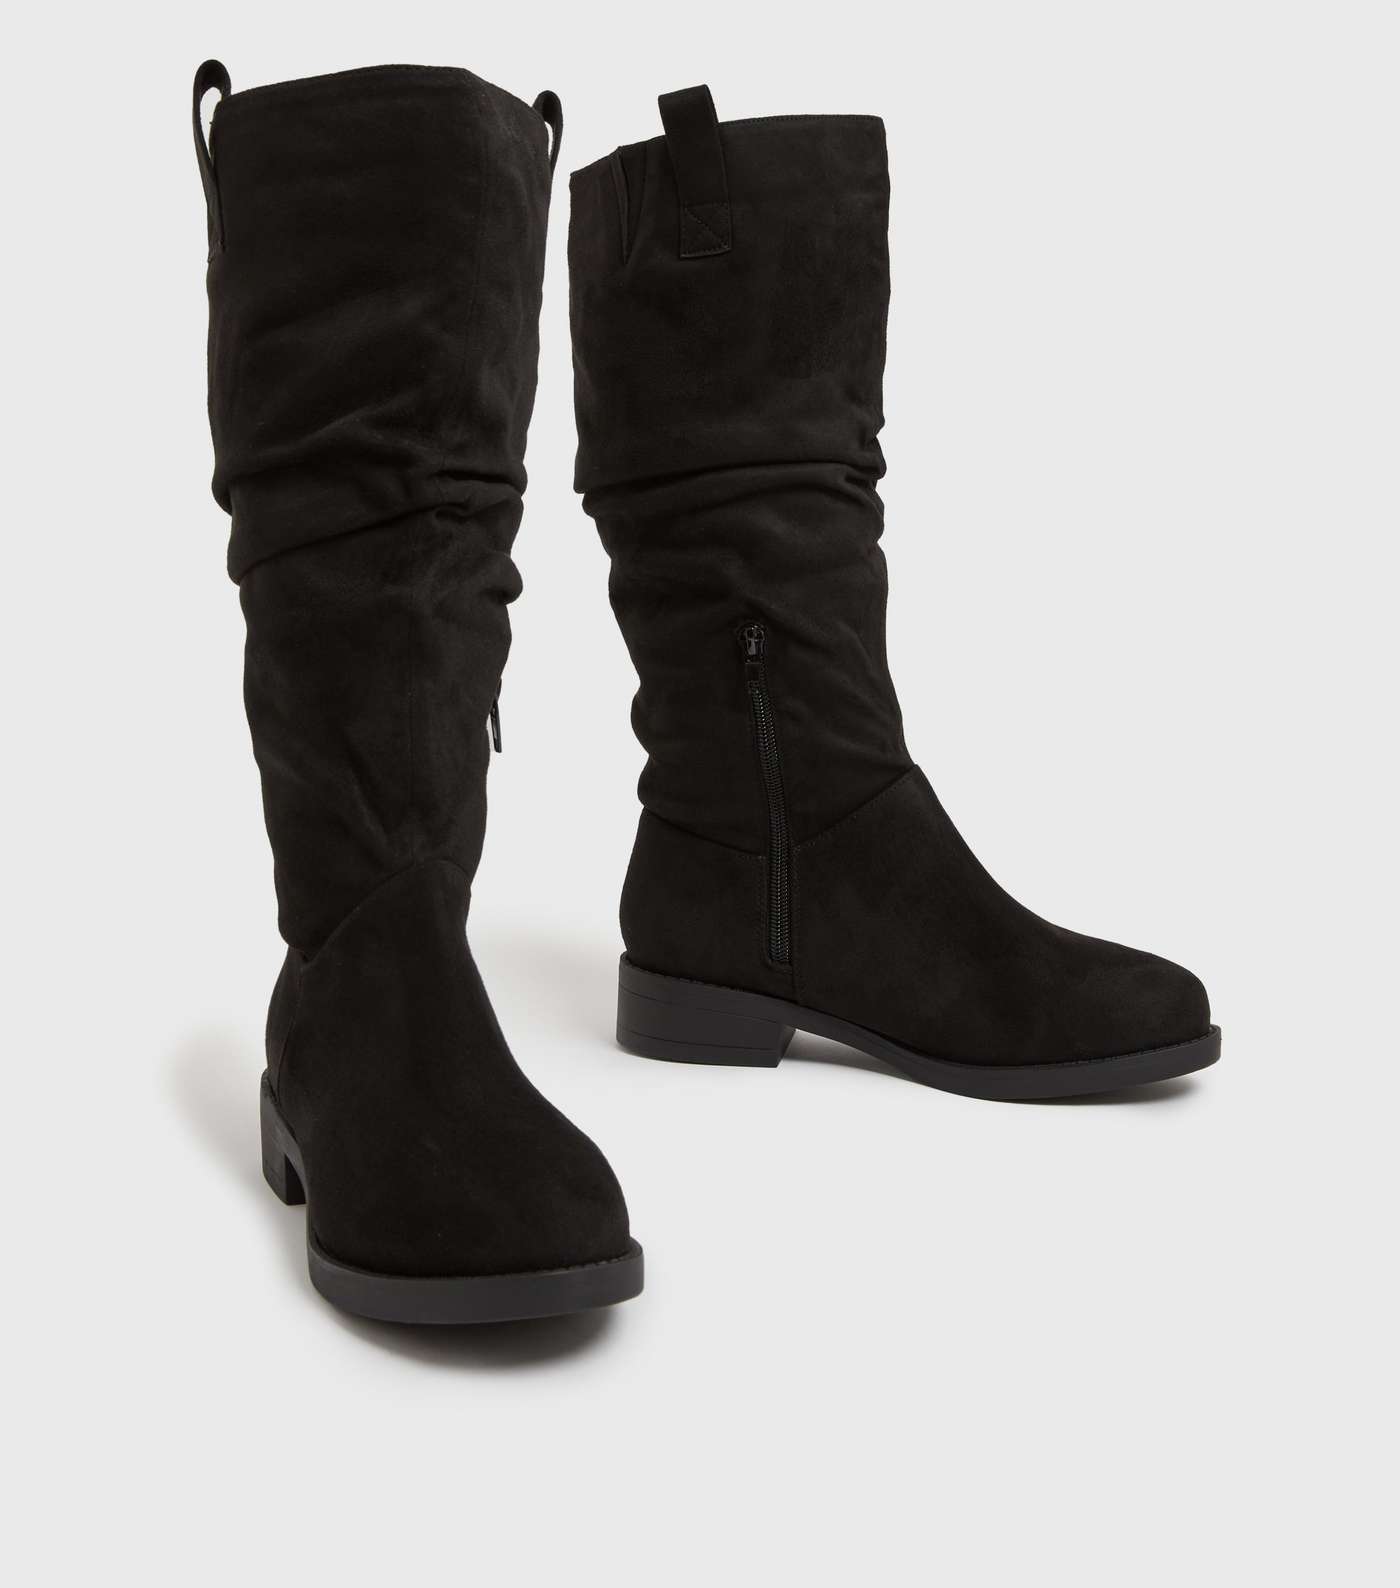 Extra Calf Fit Black Suedette Slouch Calf Boots Image 3